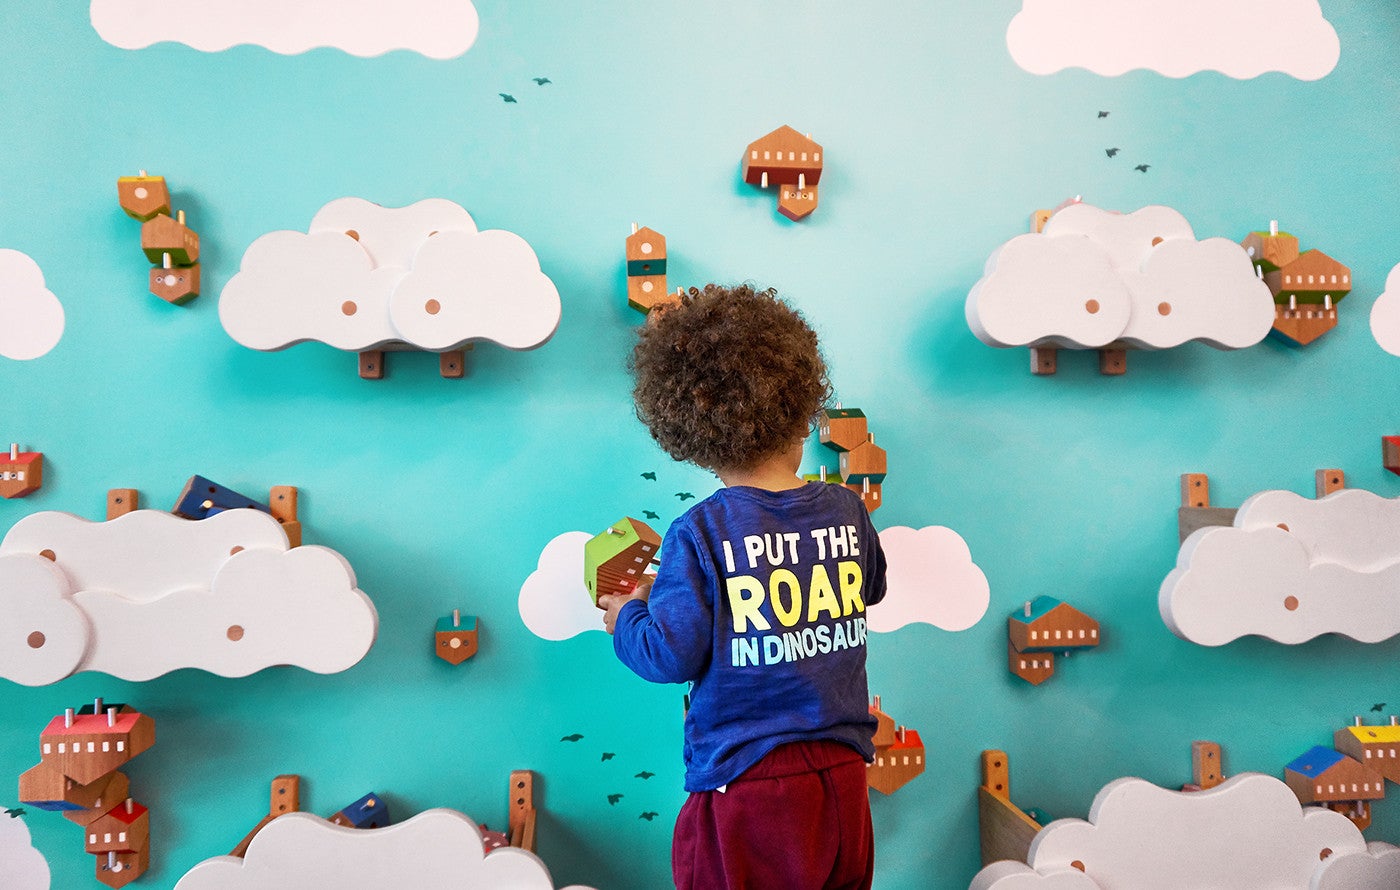 This Adorable Children’s Art Installation is the Housing Solution We All Need Introduction